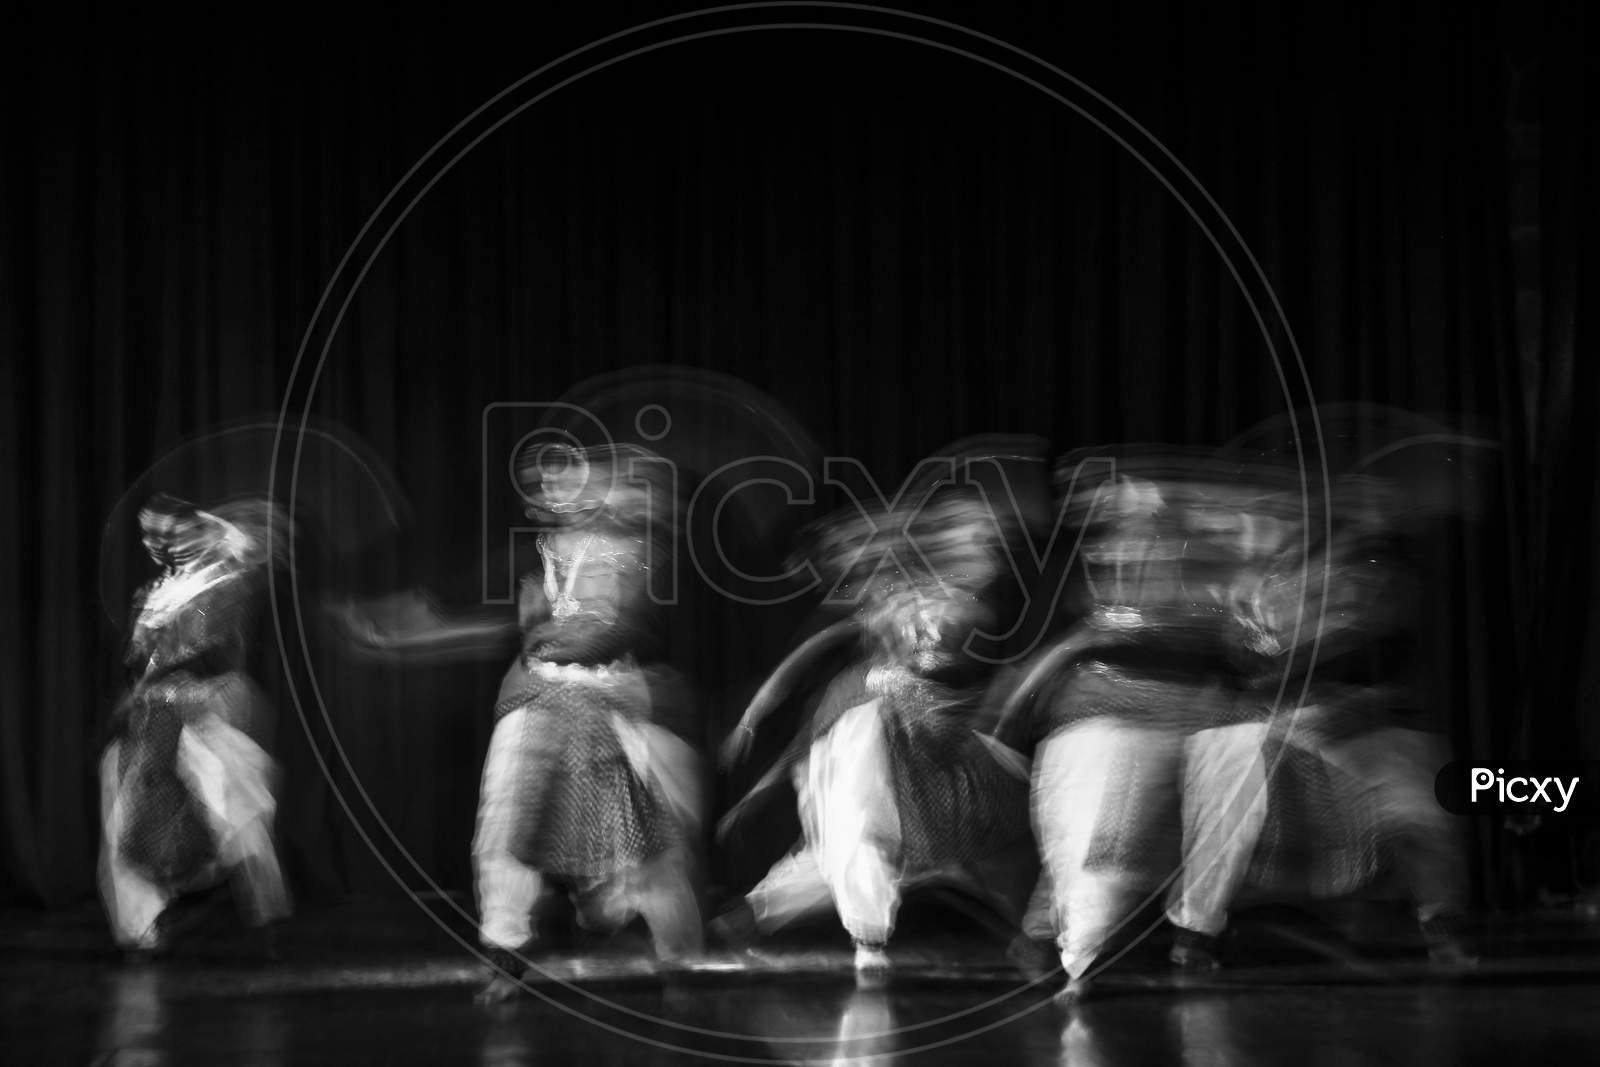 An Artistic Dancer In A Theater Shot With A Slow Shutter Speed In Order To Achieve The Desired Motion Blur.